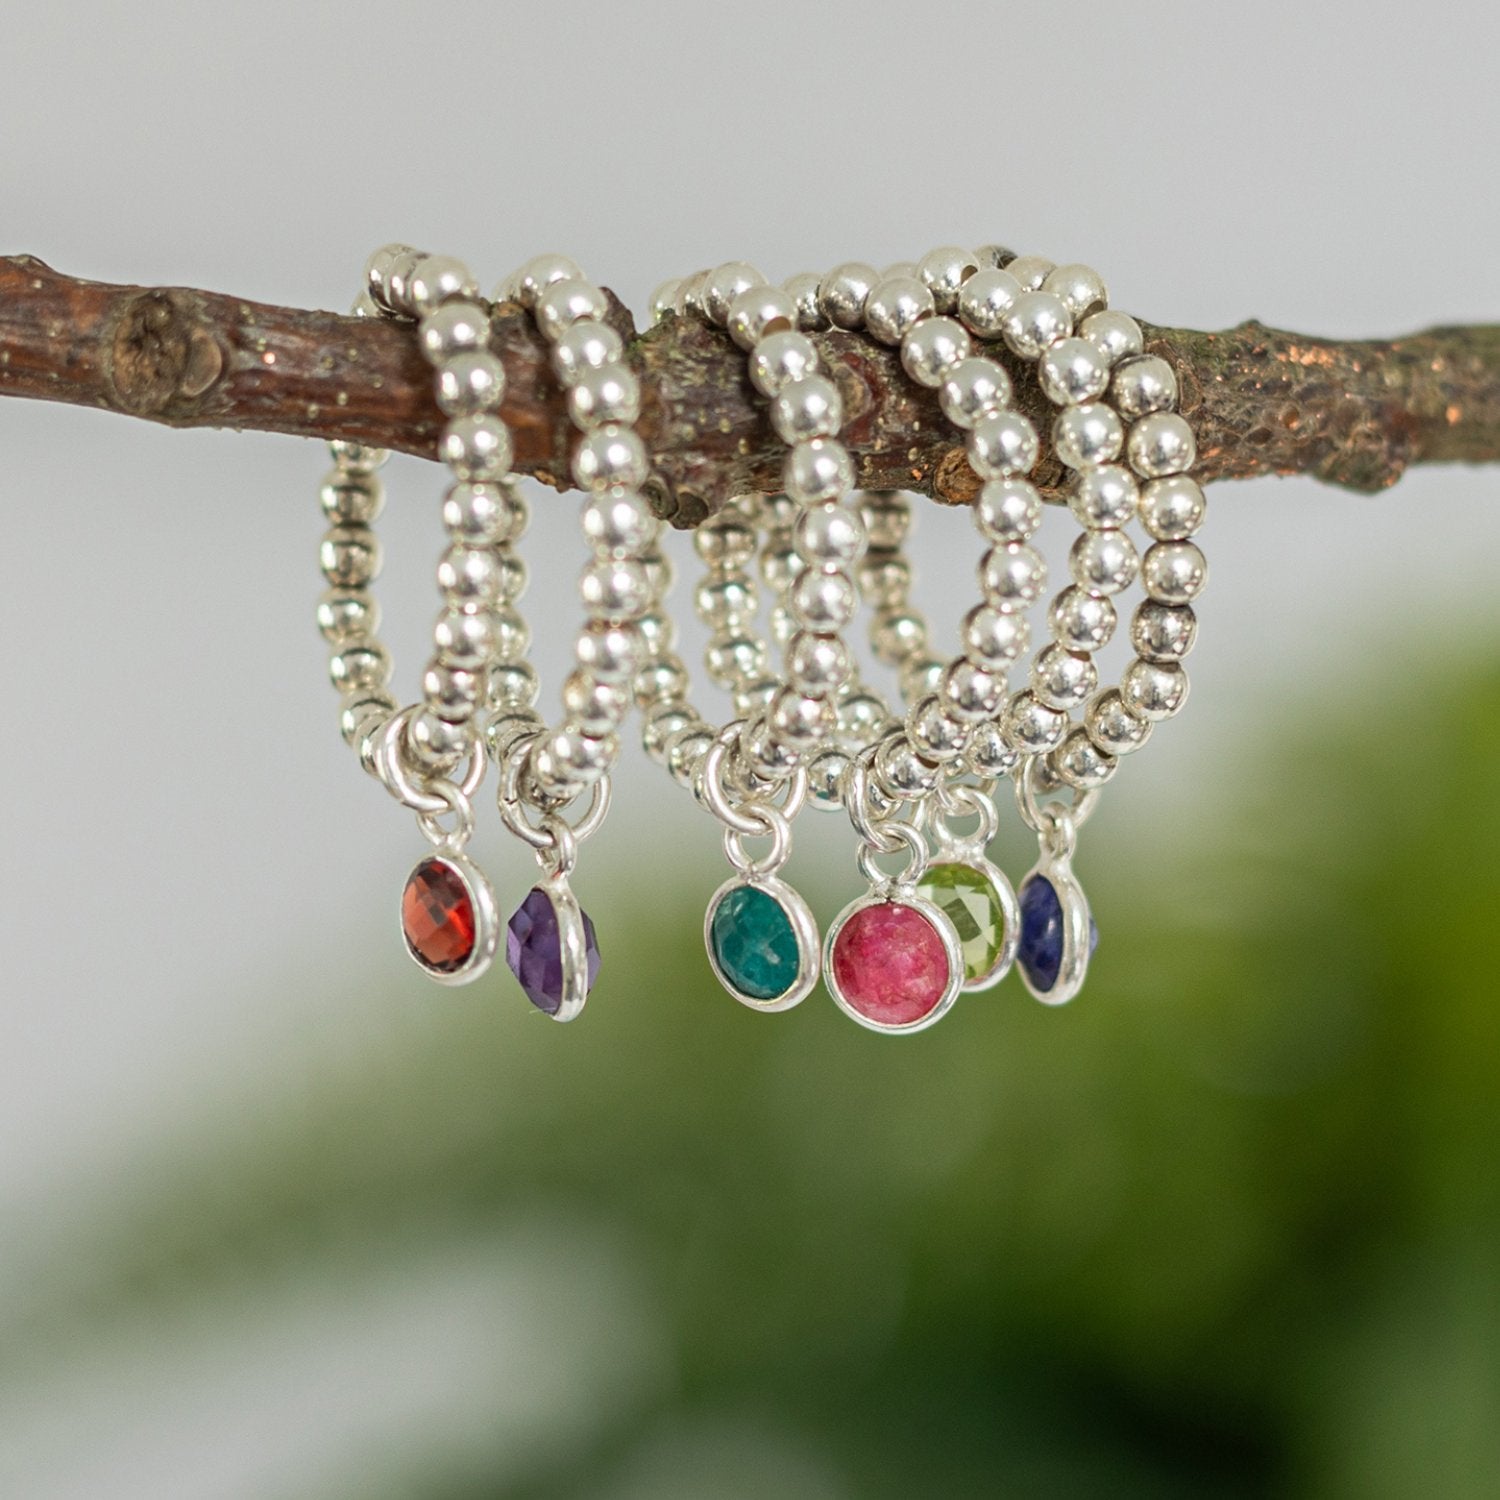 Six silver beaded rings, each with a colored gemstone charm in red, orange, purple, green, blue, and pink, are displayed on a brown branch against a blurred green background. These stackable birthstone rings add a personalized touch to your collection